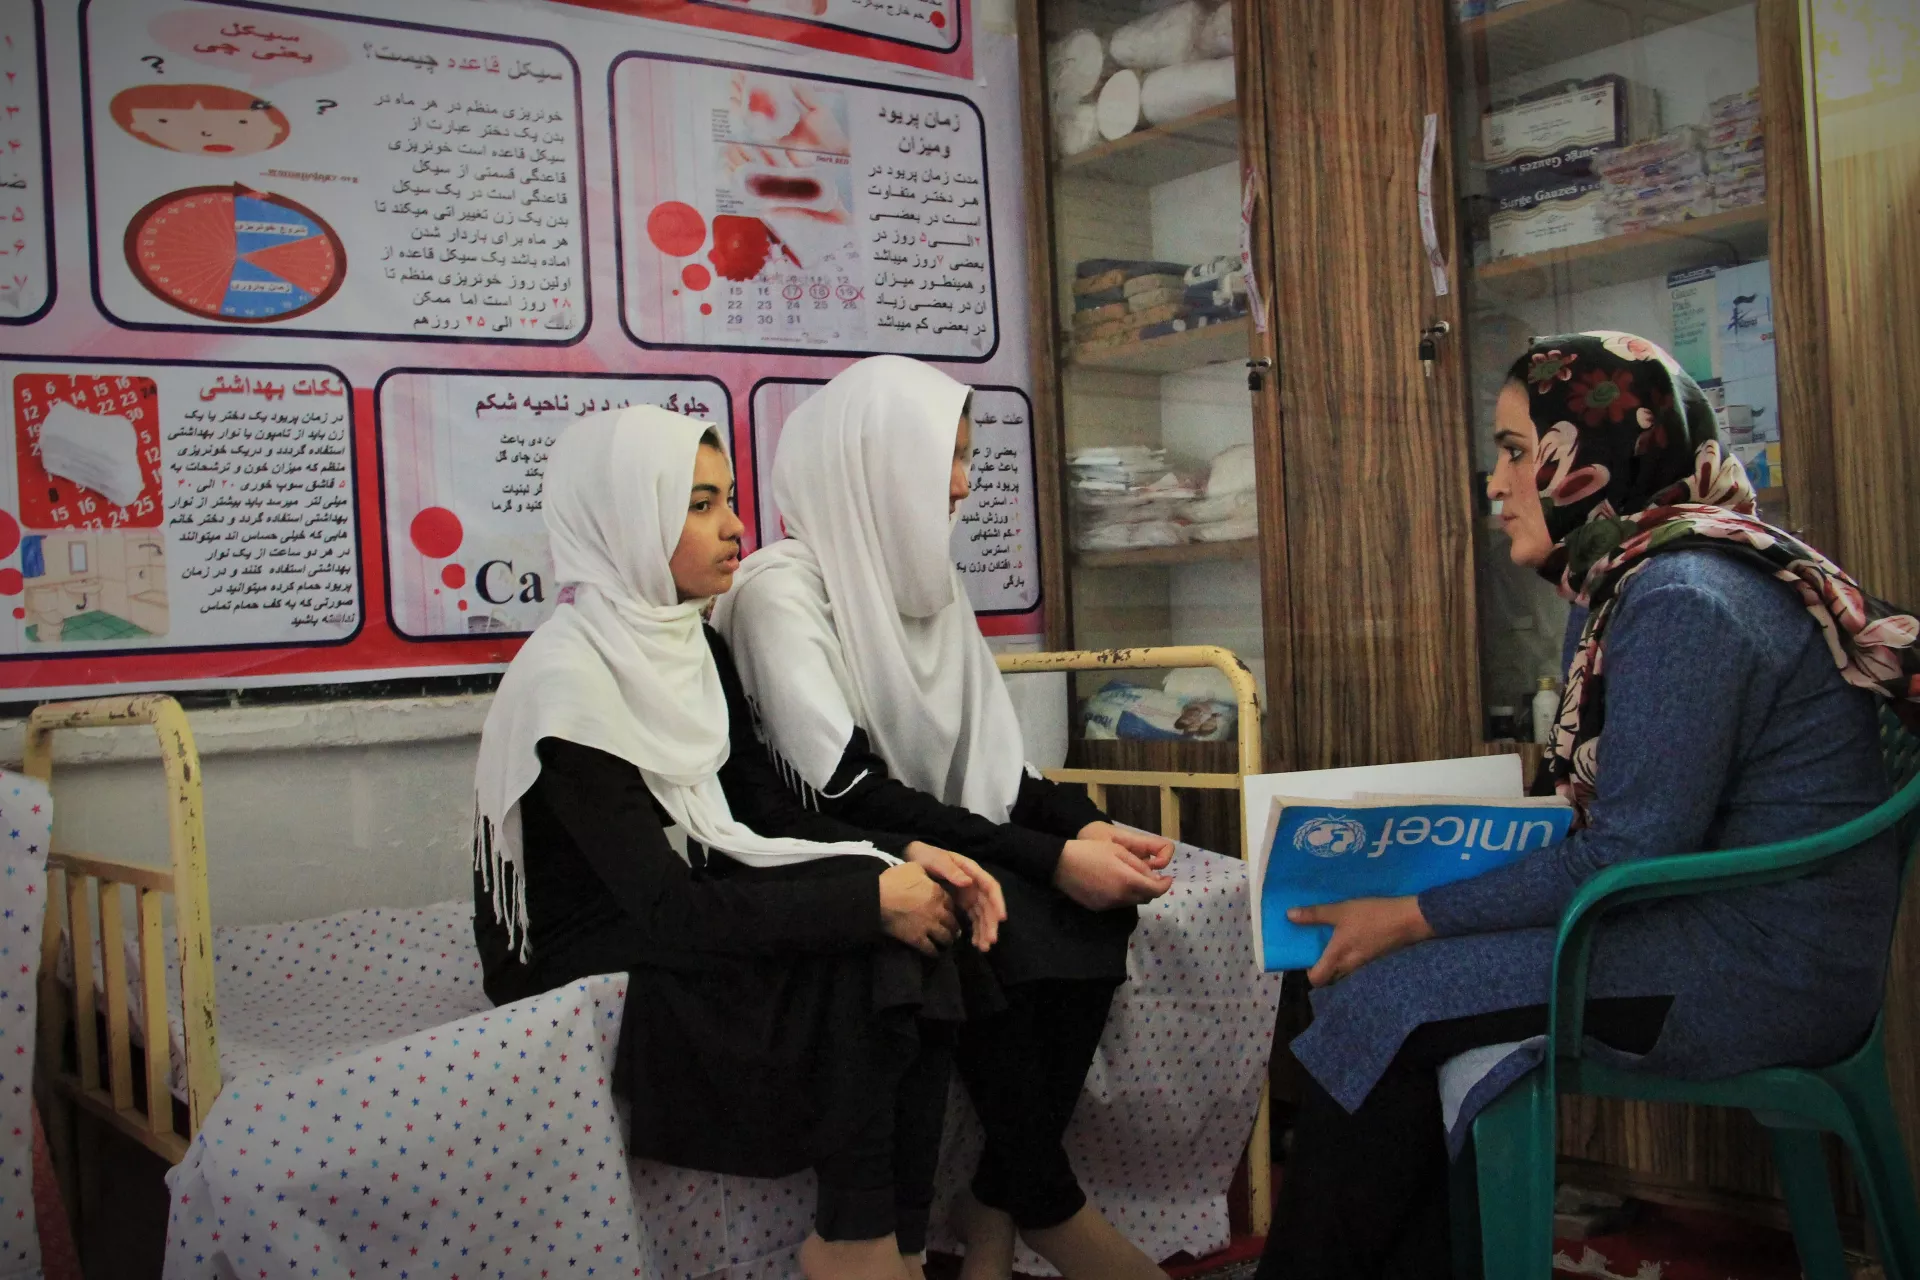 Two students attend a menstrual hygiene management counselling session at a school in Herat, Afghanistan. 